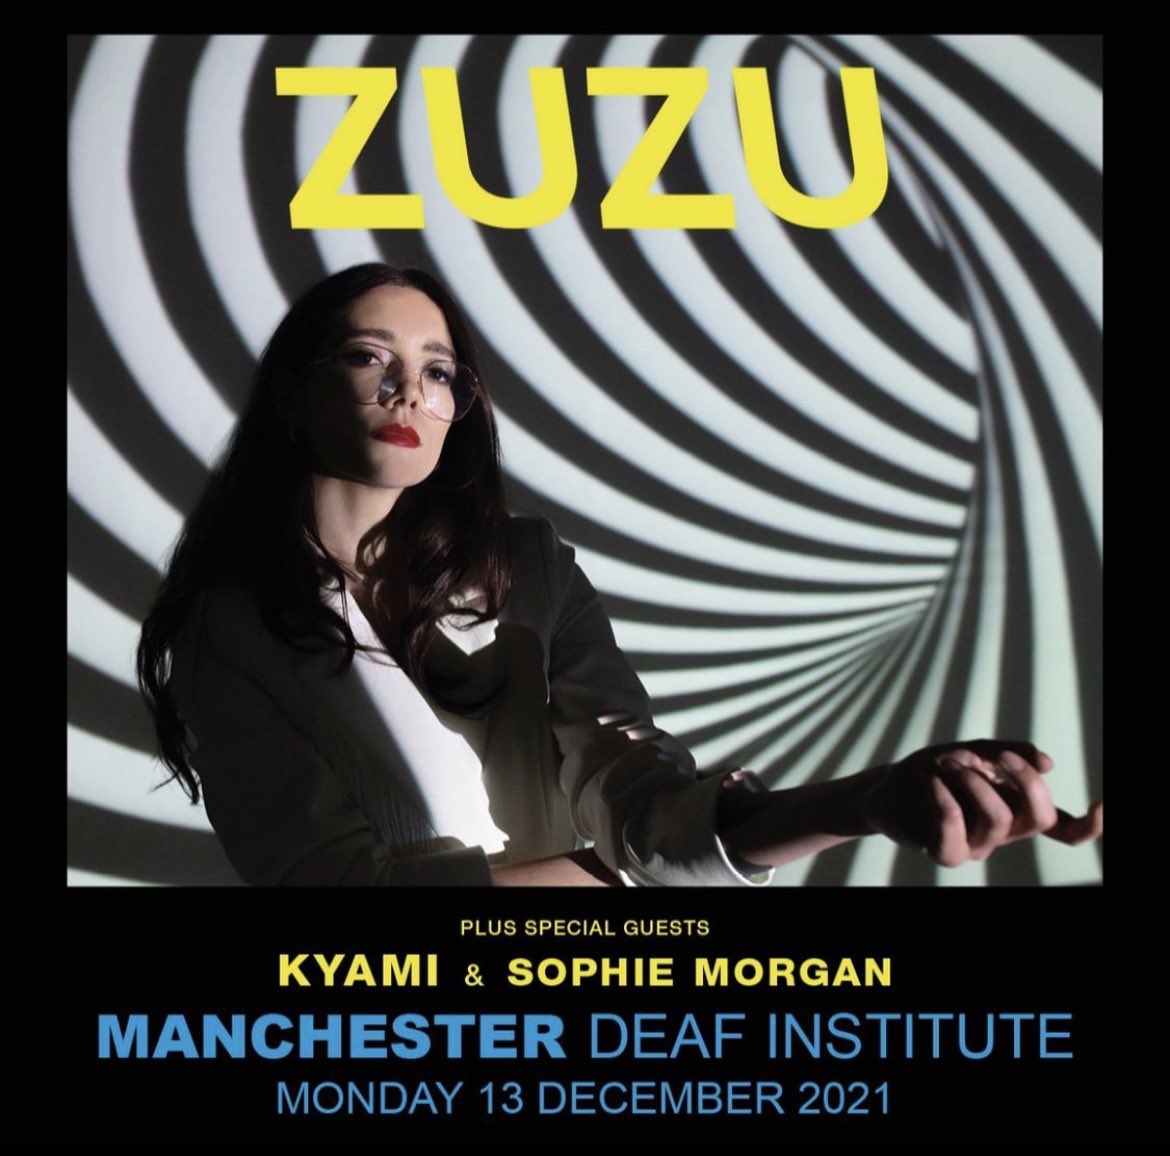 Manchester ! 🐝🐝 Tonight we play our last show of the year opening for my precious pal Zuzu 💝 Come come.. still some tickets left here: seetickets.com/event/zuzu/the…